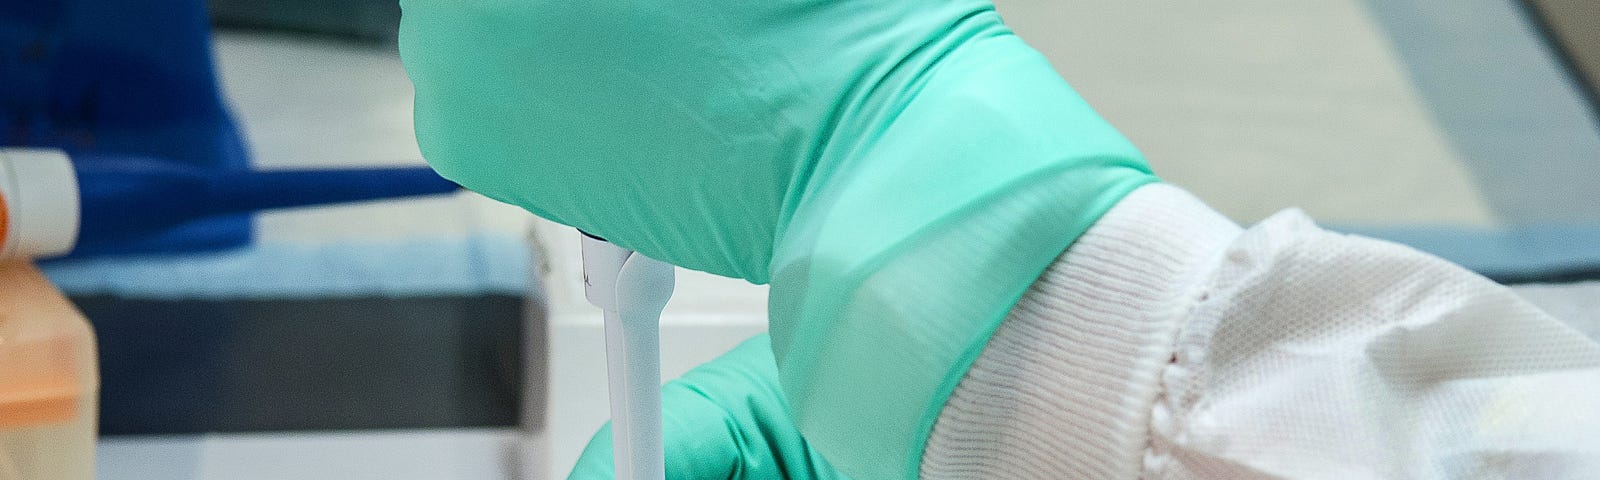 Person pipetting with gloved hands